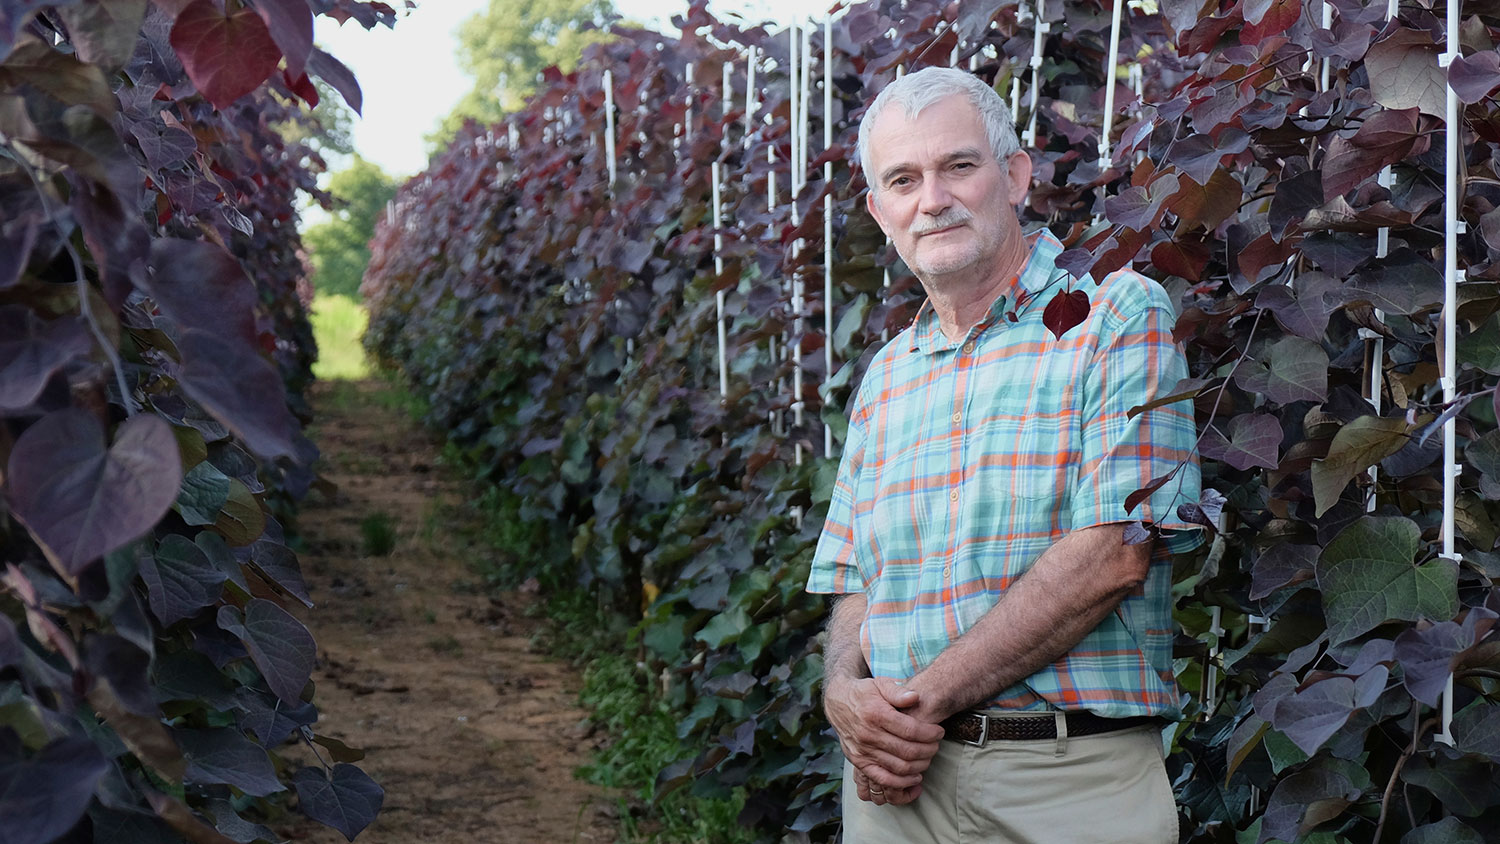 Man standing in rows of plants with glossy purple foliage.